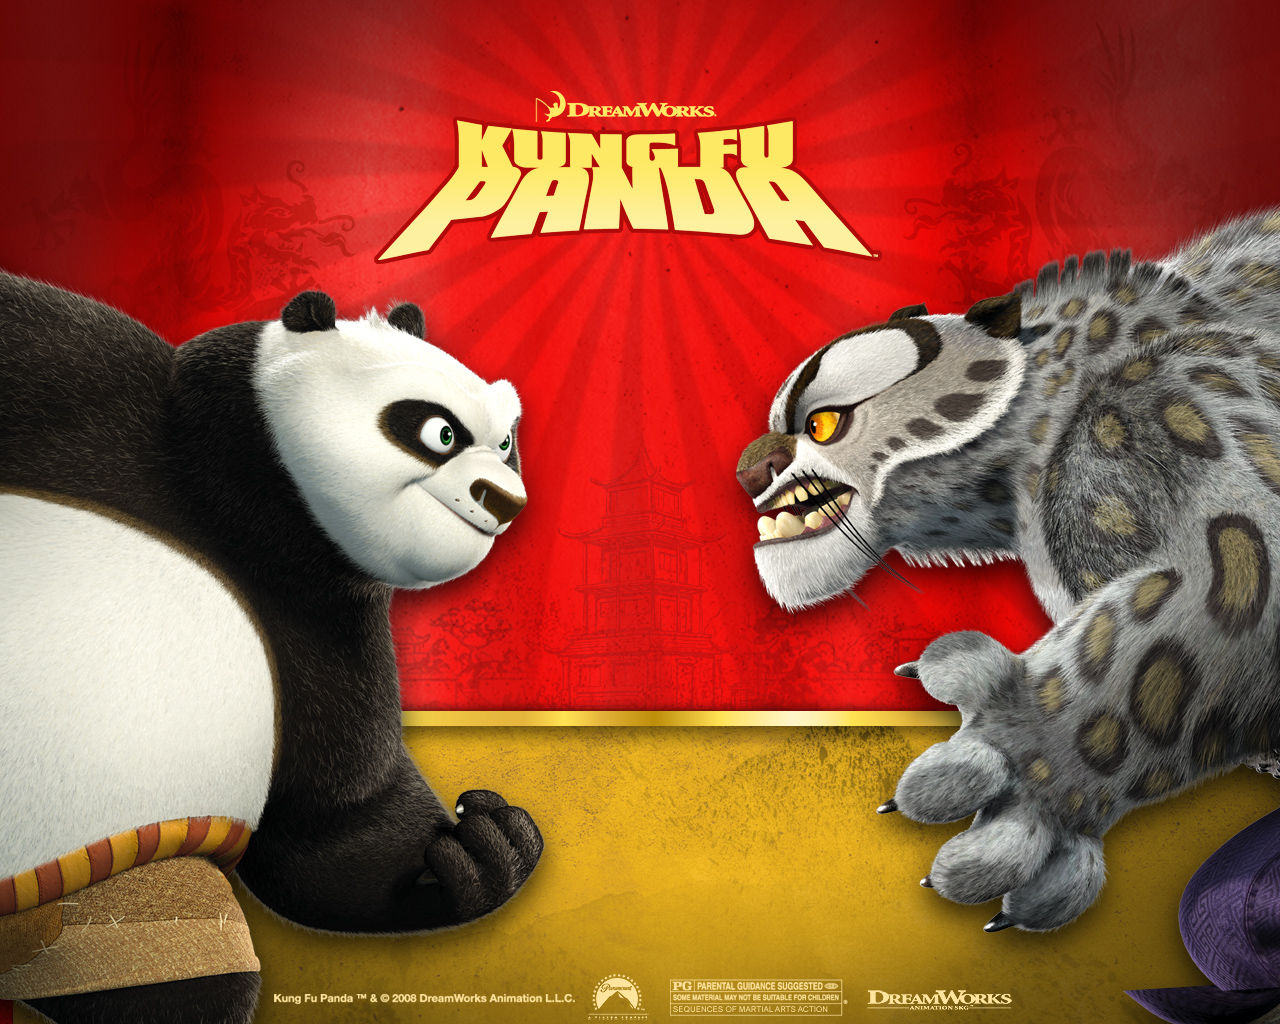 Click on the image to download Kung Fu Panda Wallpaper!!